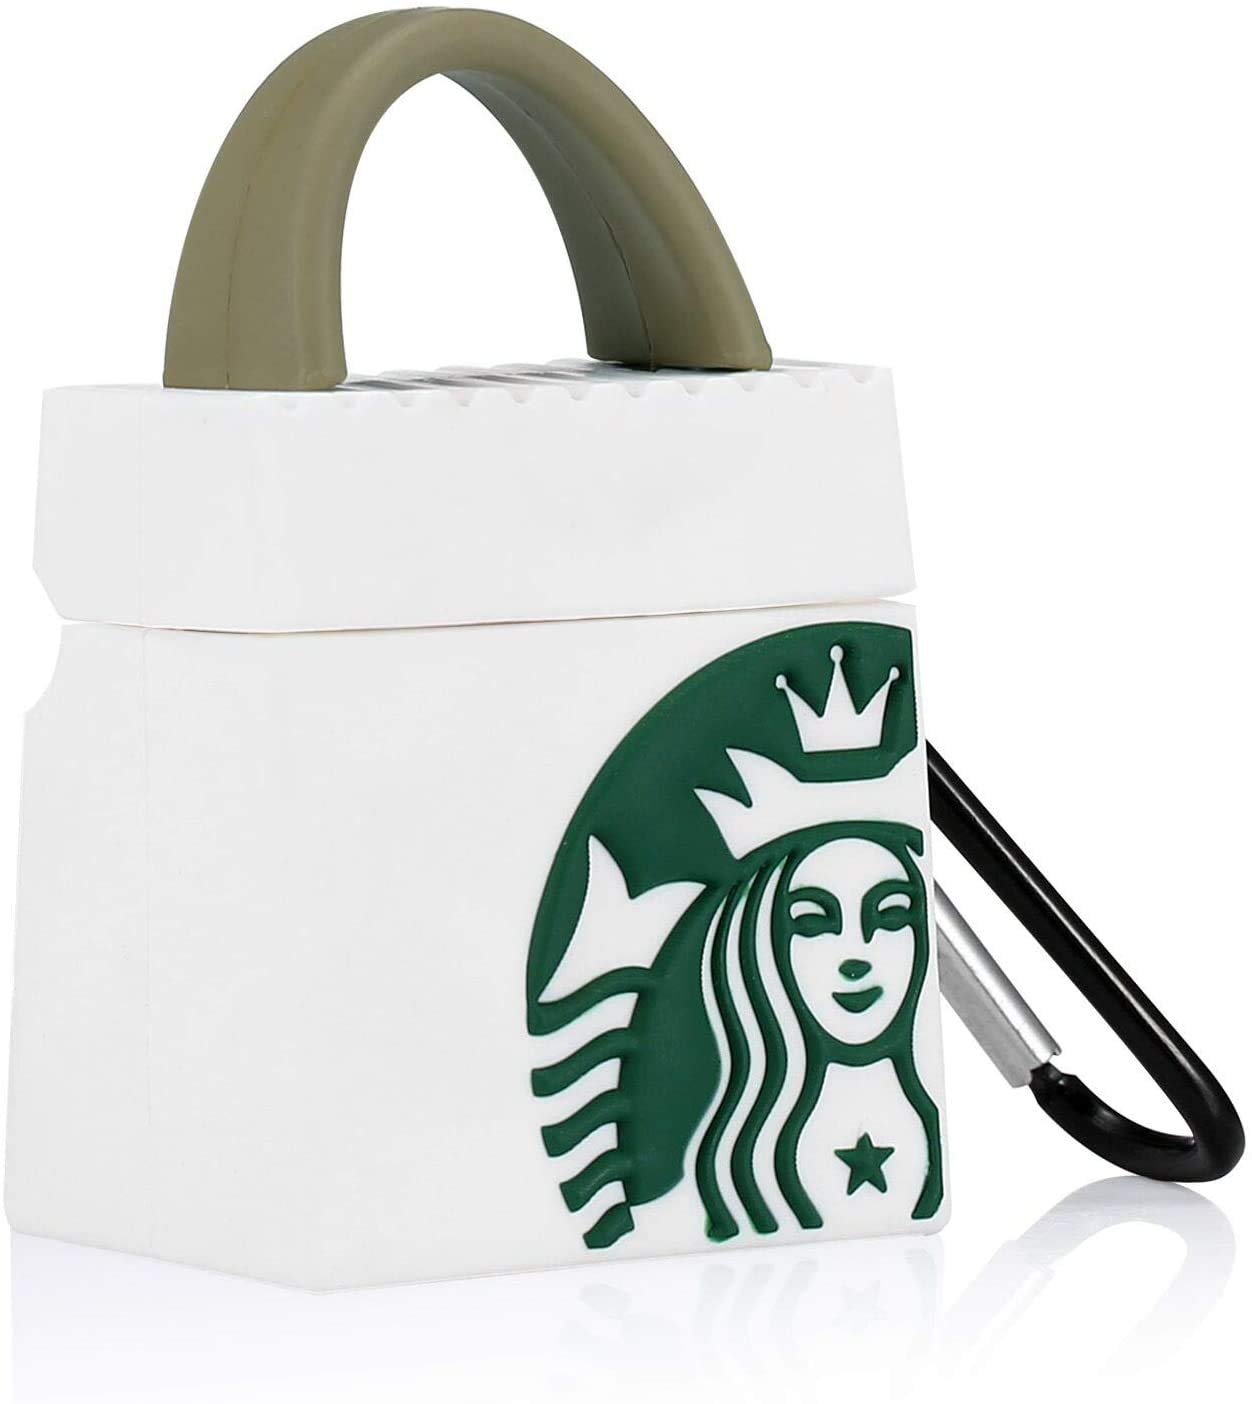 Starbucks Bag Airpods Case for Apple AirPods (1,2nd Gen) - With Metal Clip